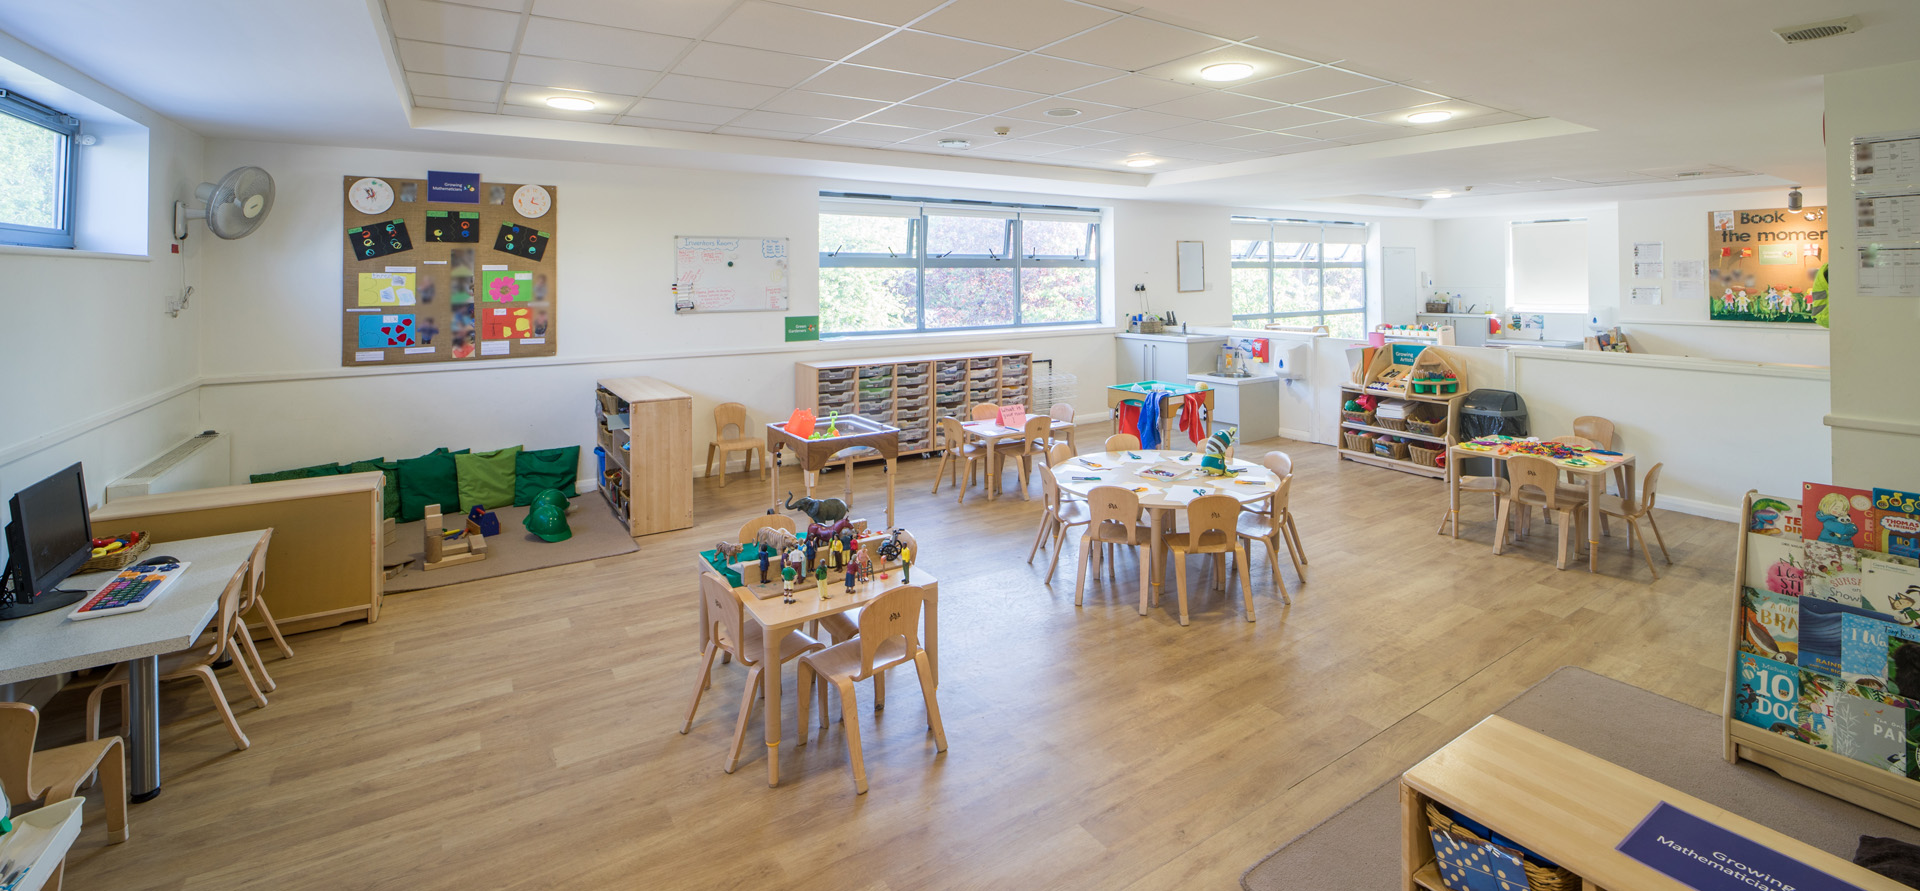 Bright Horizons Epping Nursery Images